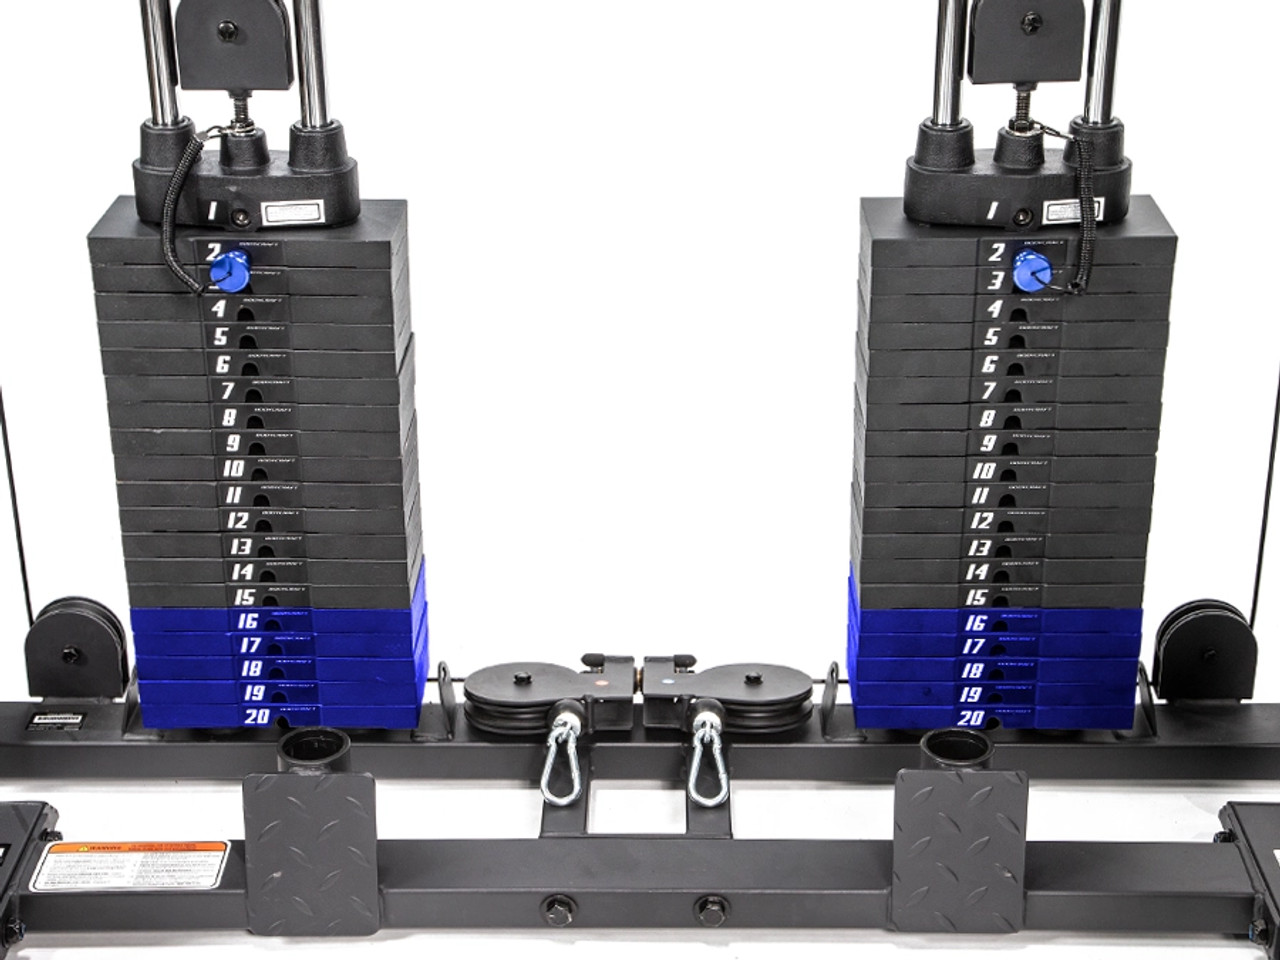 F739 Battle Rope Option for RFT Pro, and F730 Power Rack